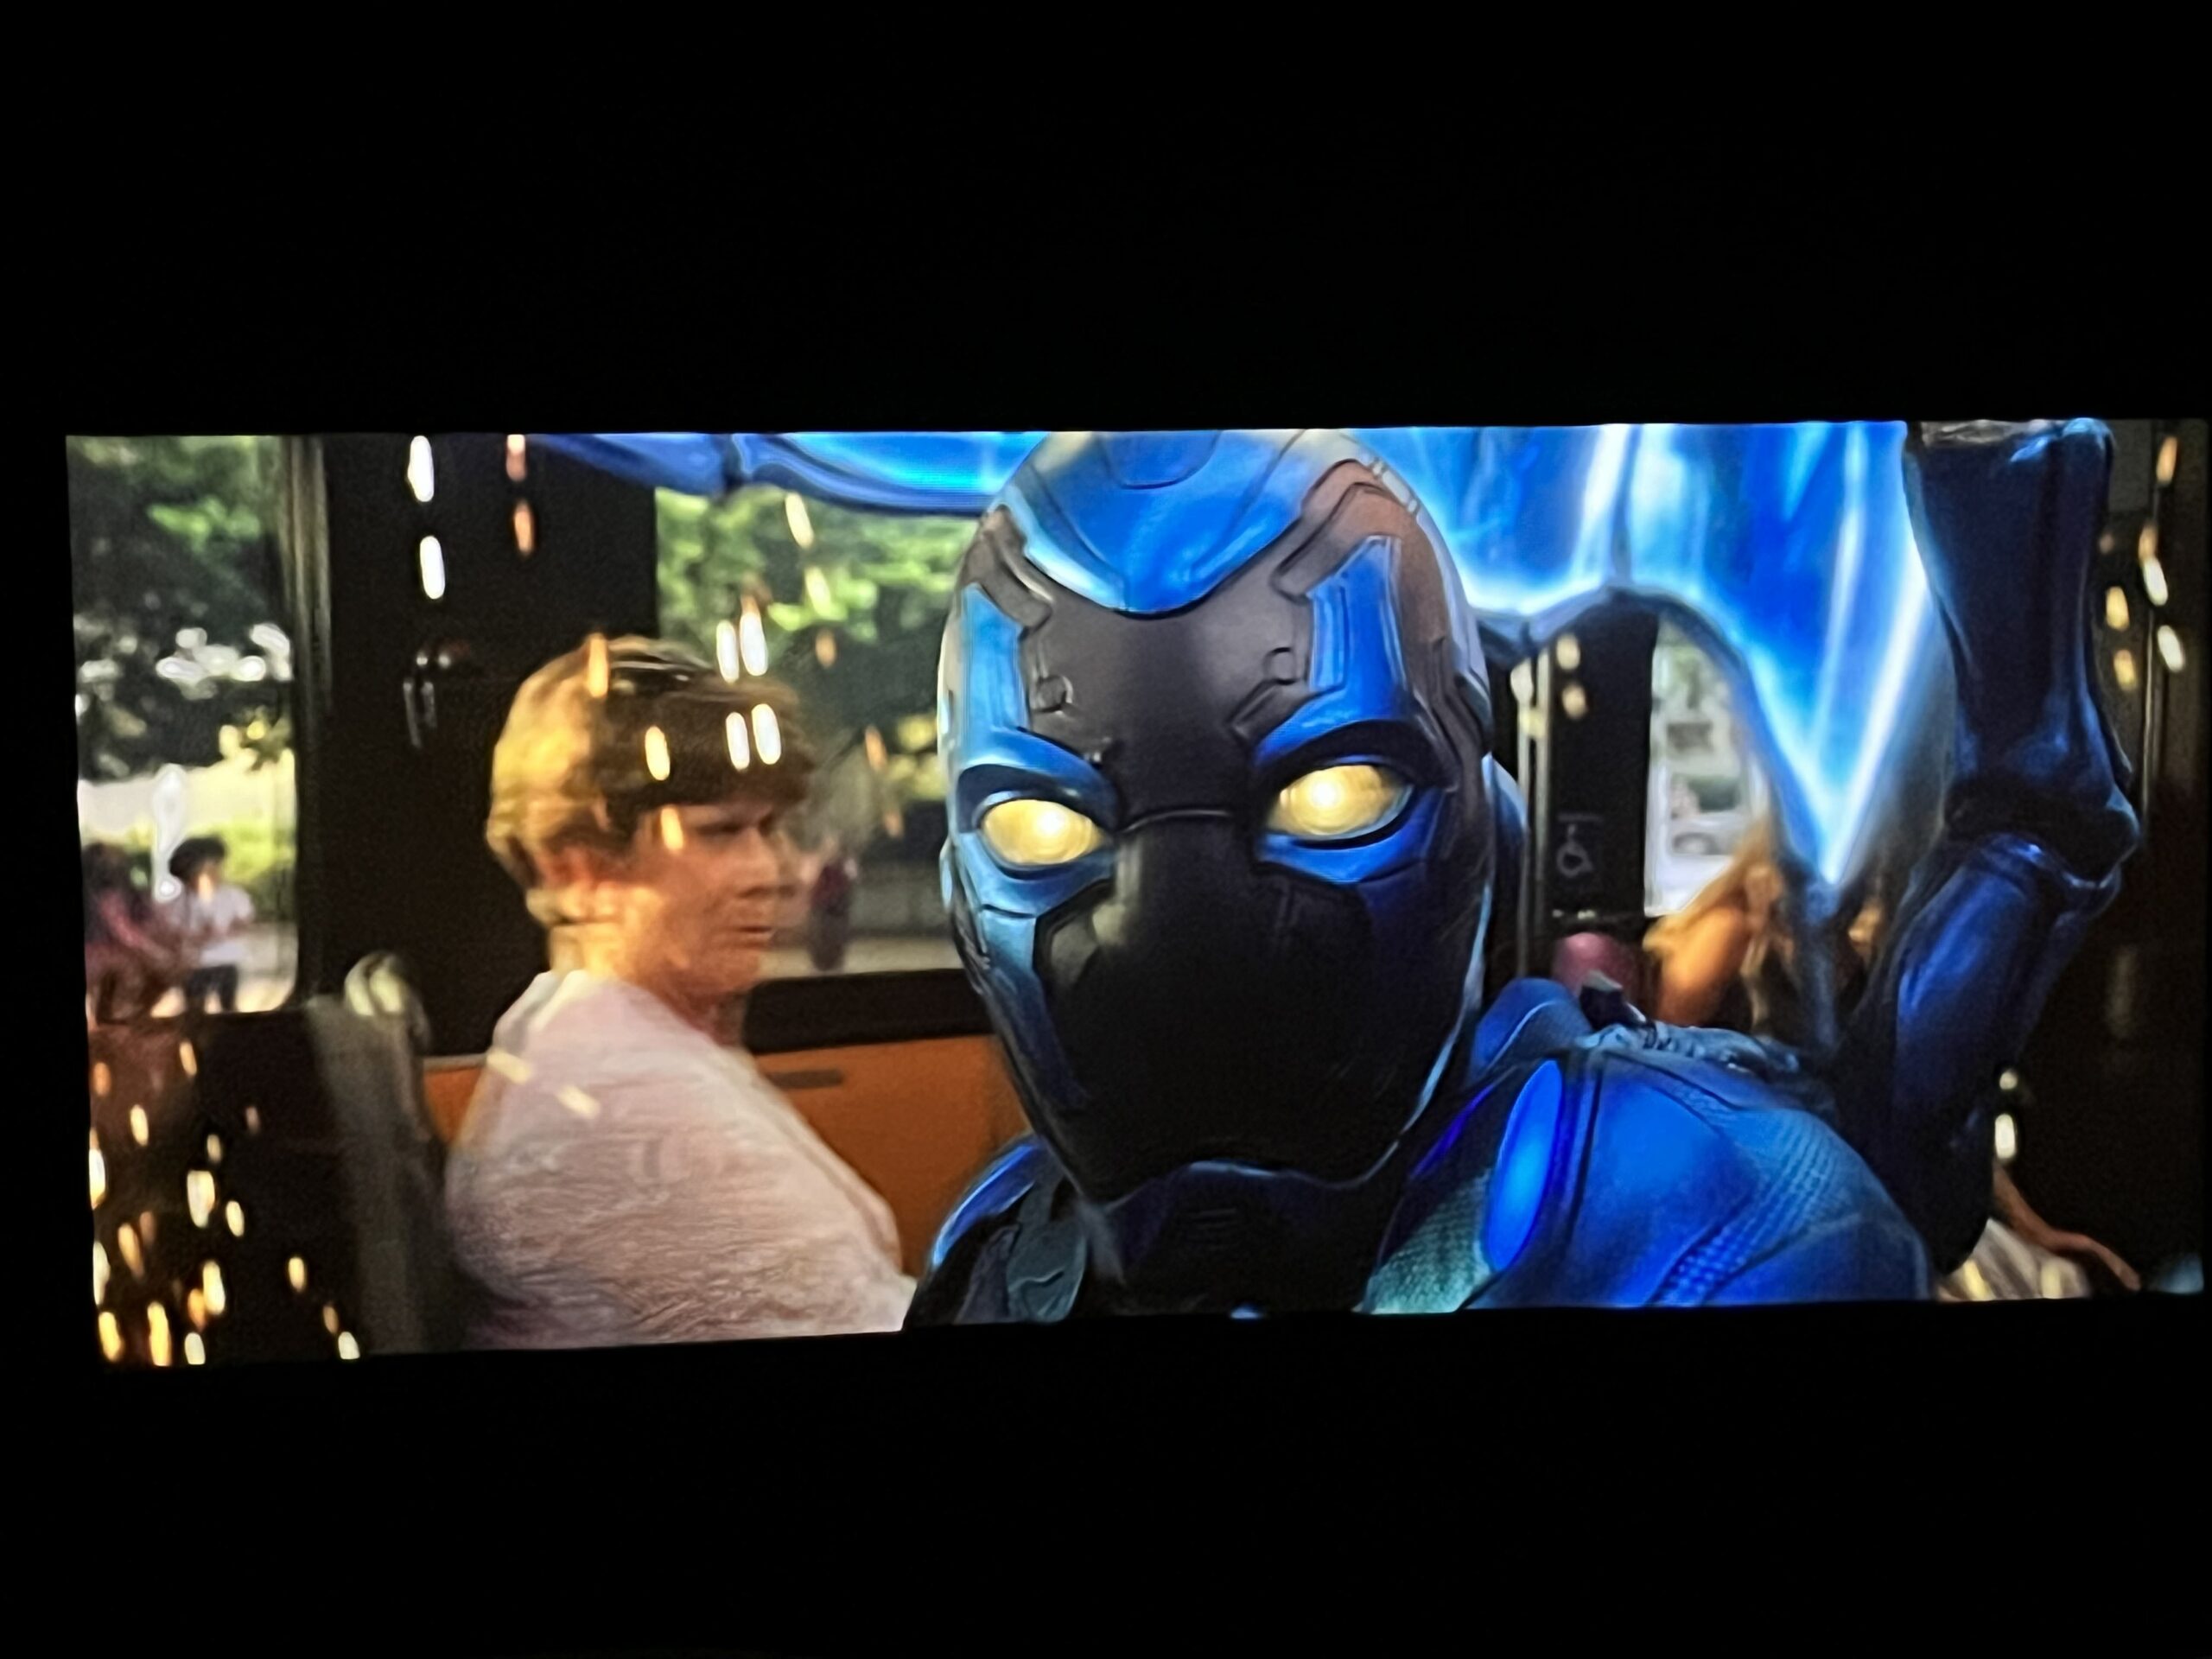 Blue Beetle' Director Calls Cast 'Heroes' for Skipping L.A. Premiere